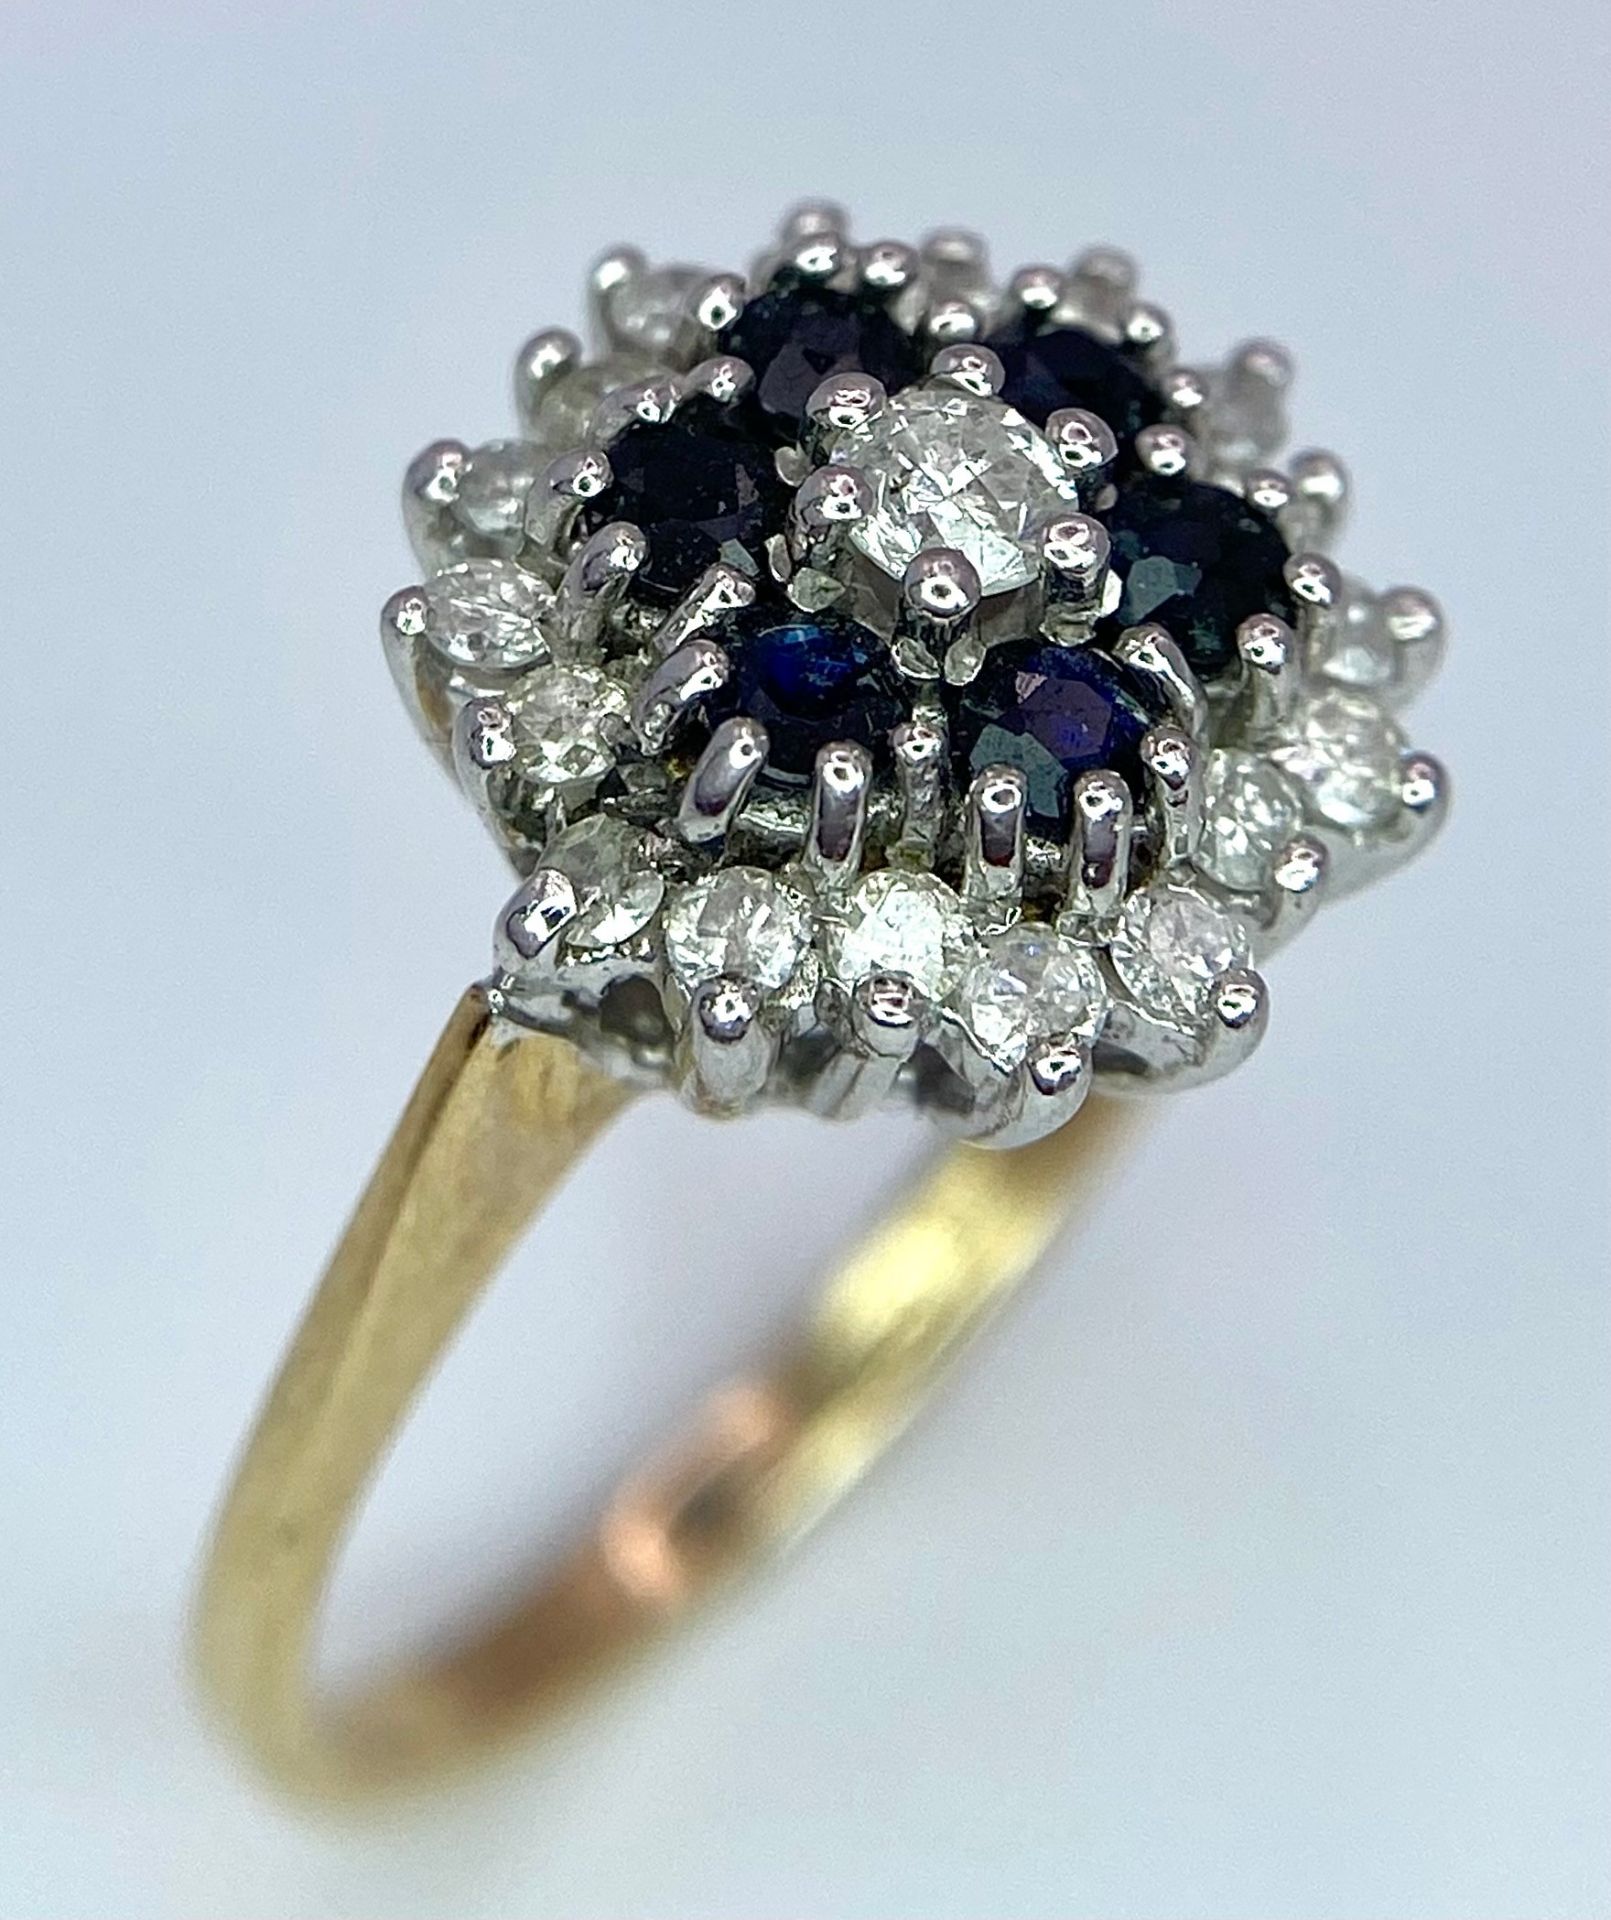 A 9K YELLOW GOLD DIAMOND & SAPPHIRE CLUSTER RING 2.5G SIZE J SPAS 9019 - Image 2 of 7